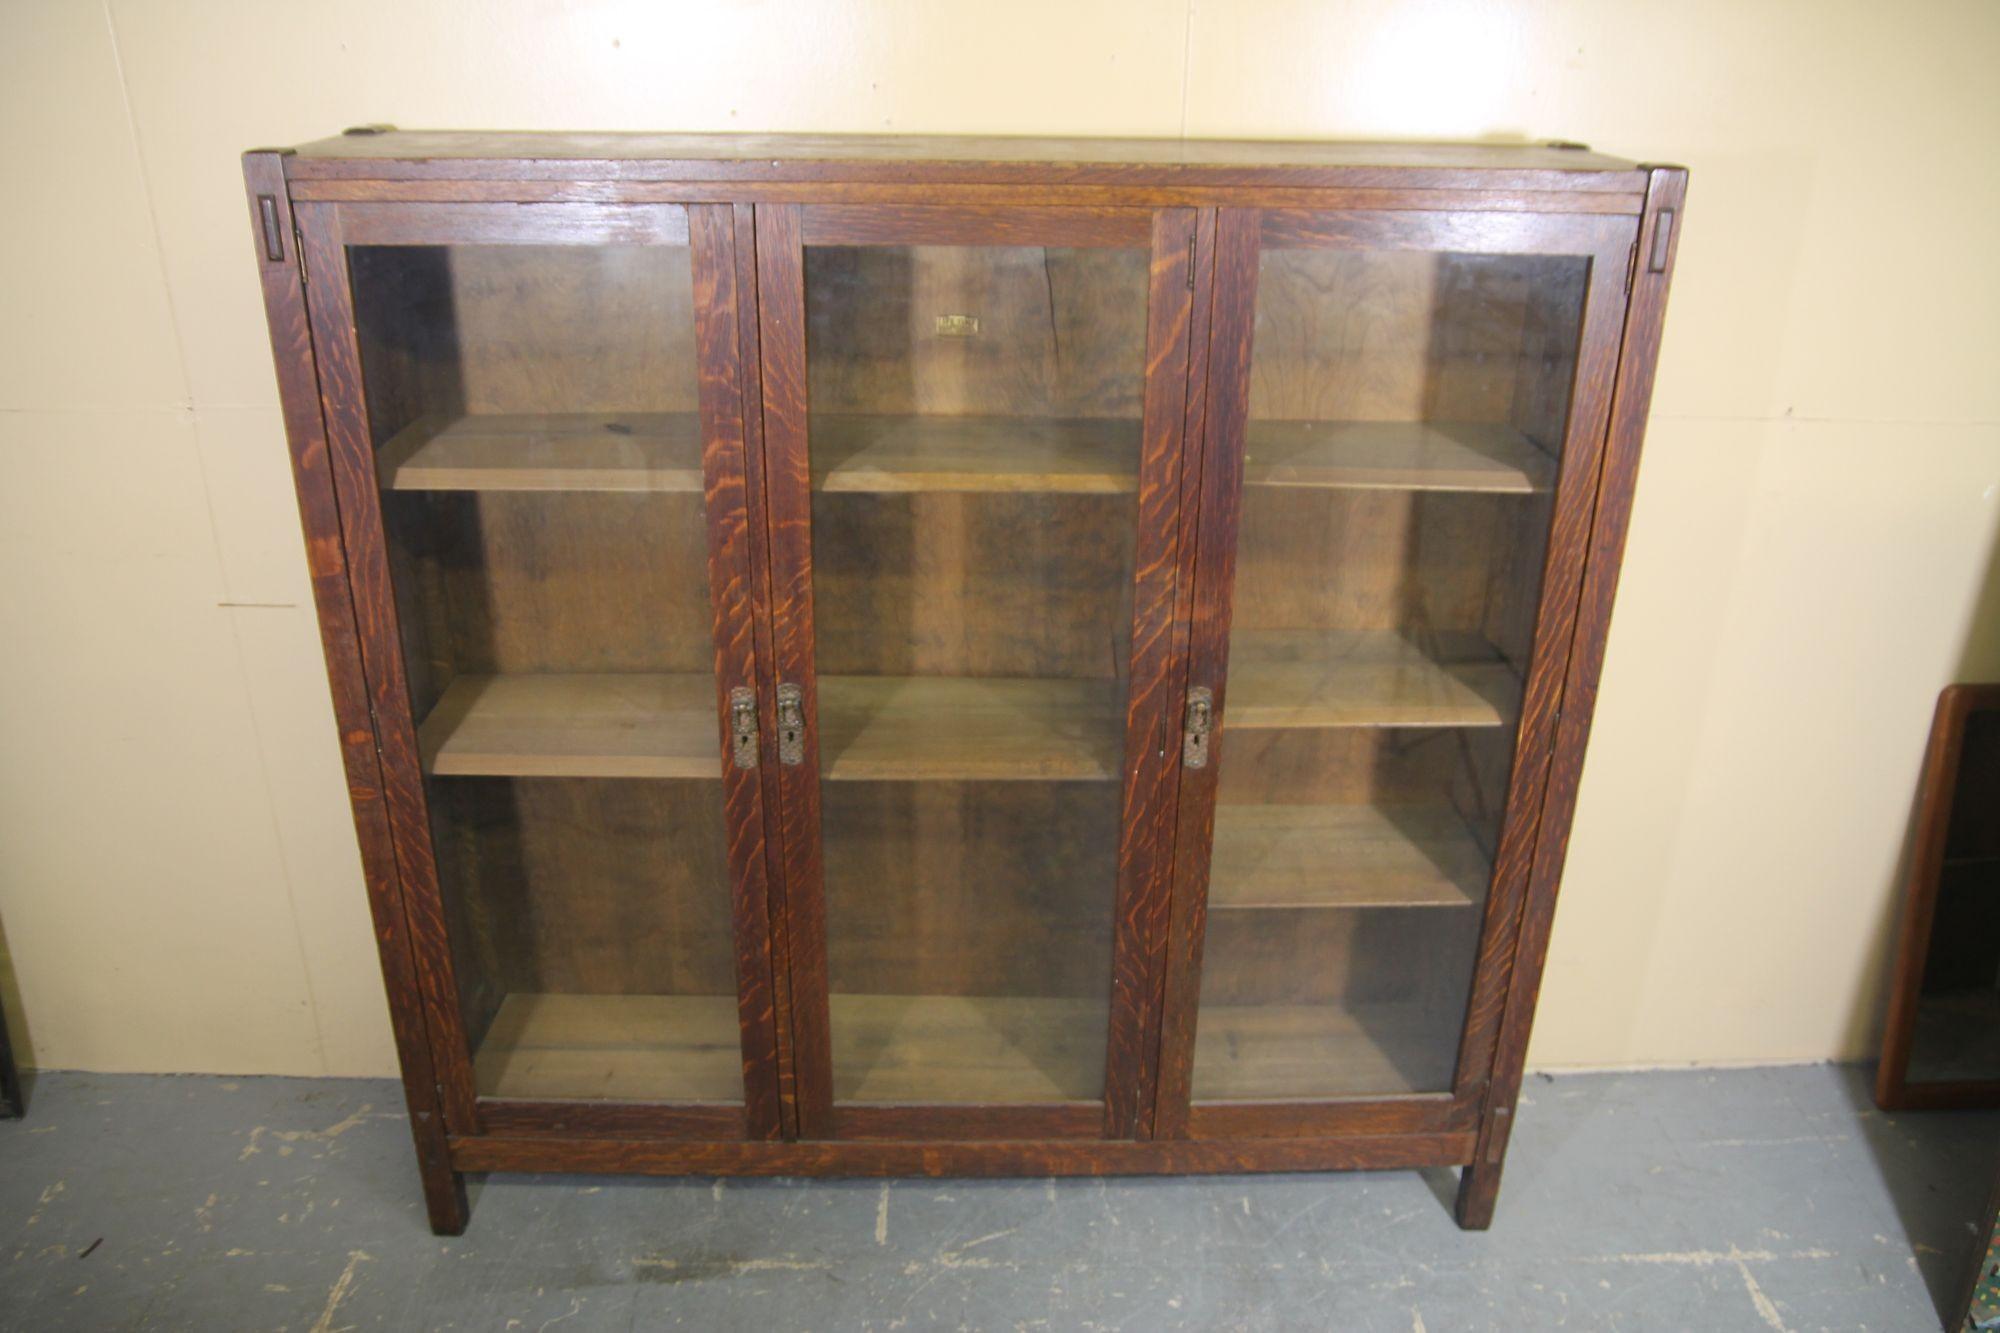 Im pleased to offer a great 3 door bookcase from Lifetime. This bookcase is in nice vintage condition and retains its original hand made handles and manufactures tag. The bookcase also has its original finish.